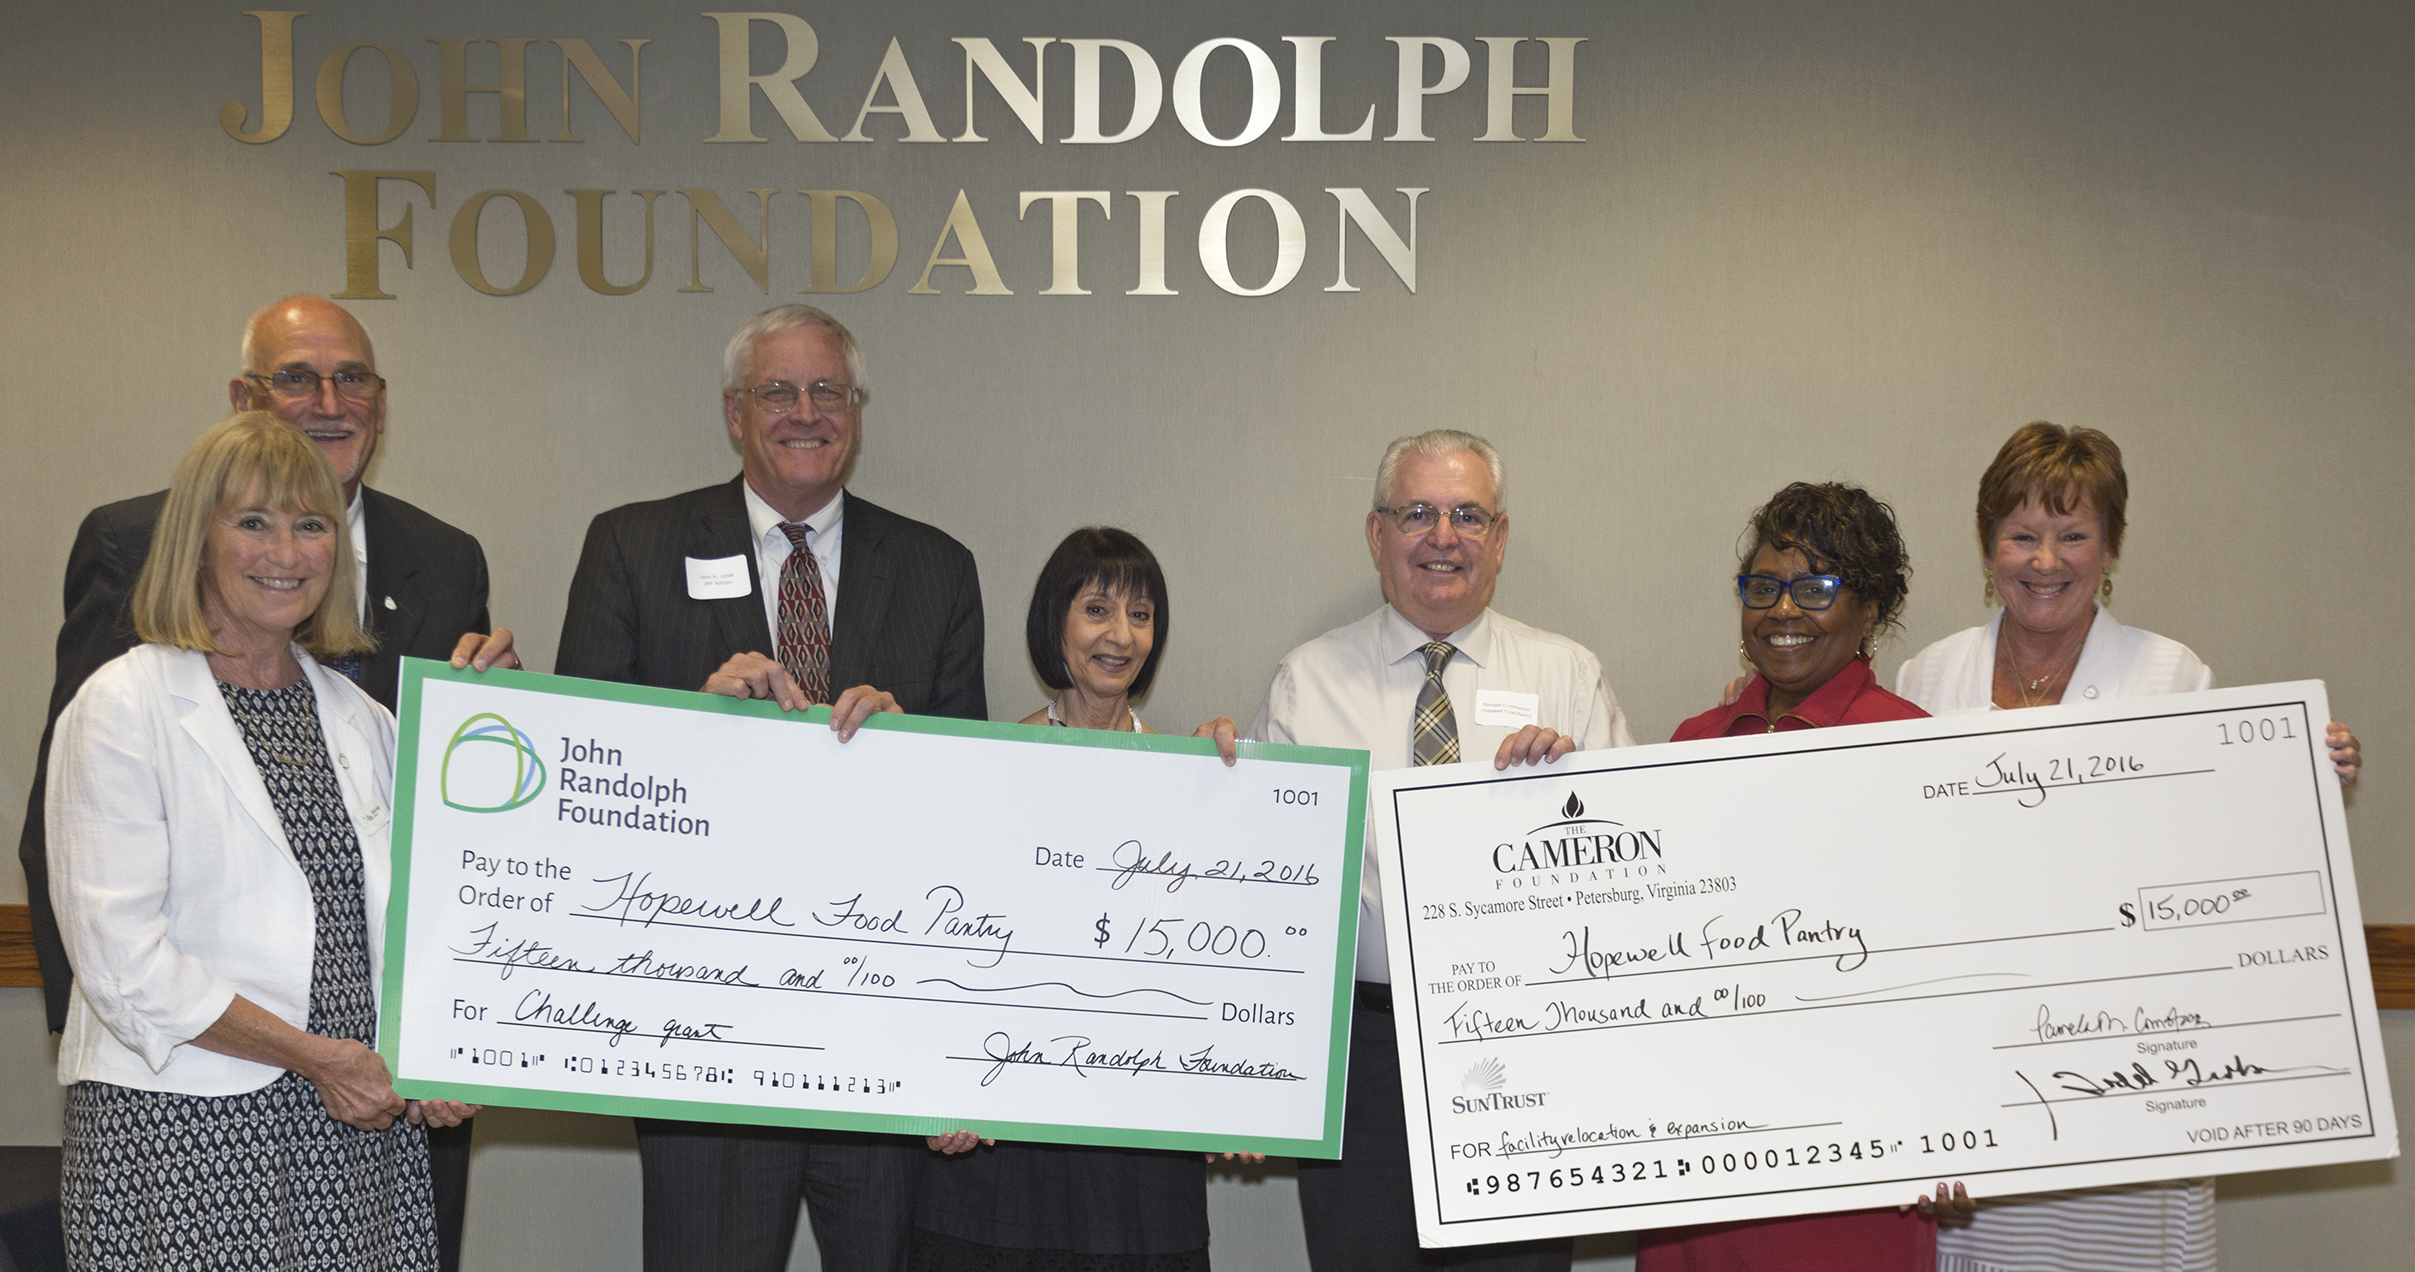 Cameron Foundation and John Randolph Foundation Partner to Give Grant to the Hopewell Food Pantry